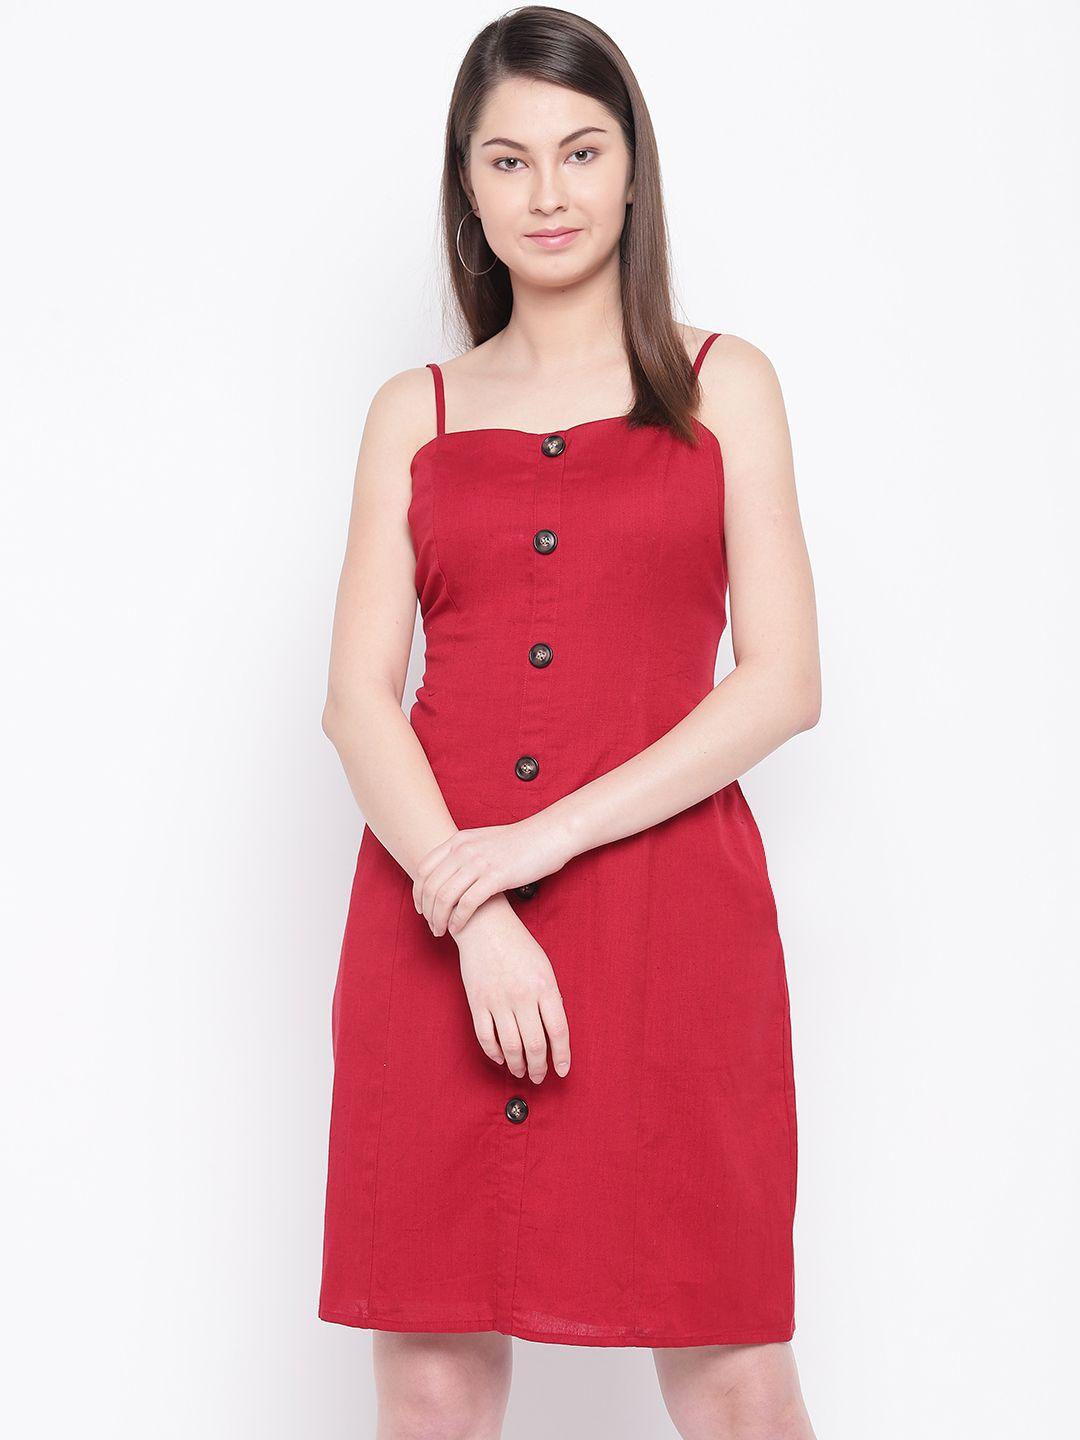 marie claire women red solid a-line dress